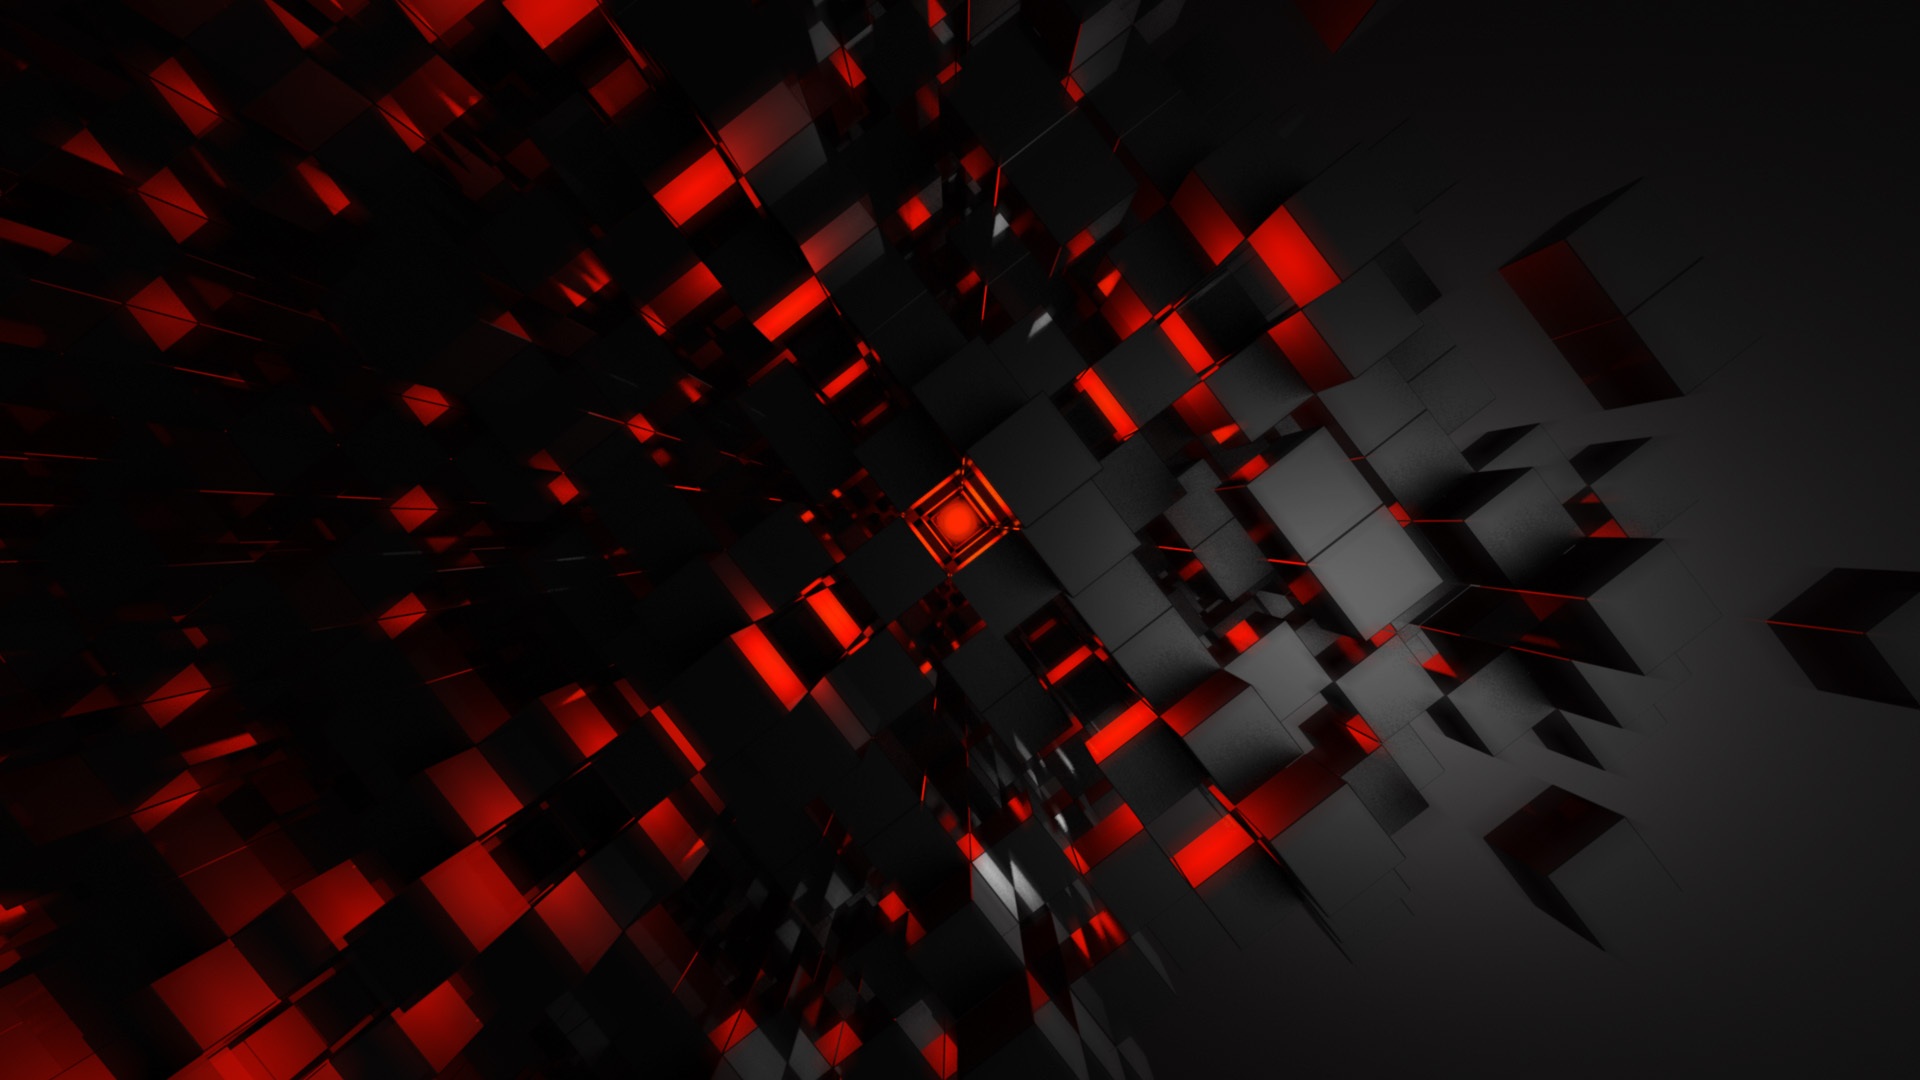 3d Wallpaper Black And Red Image Num 35